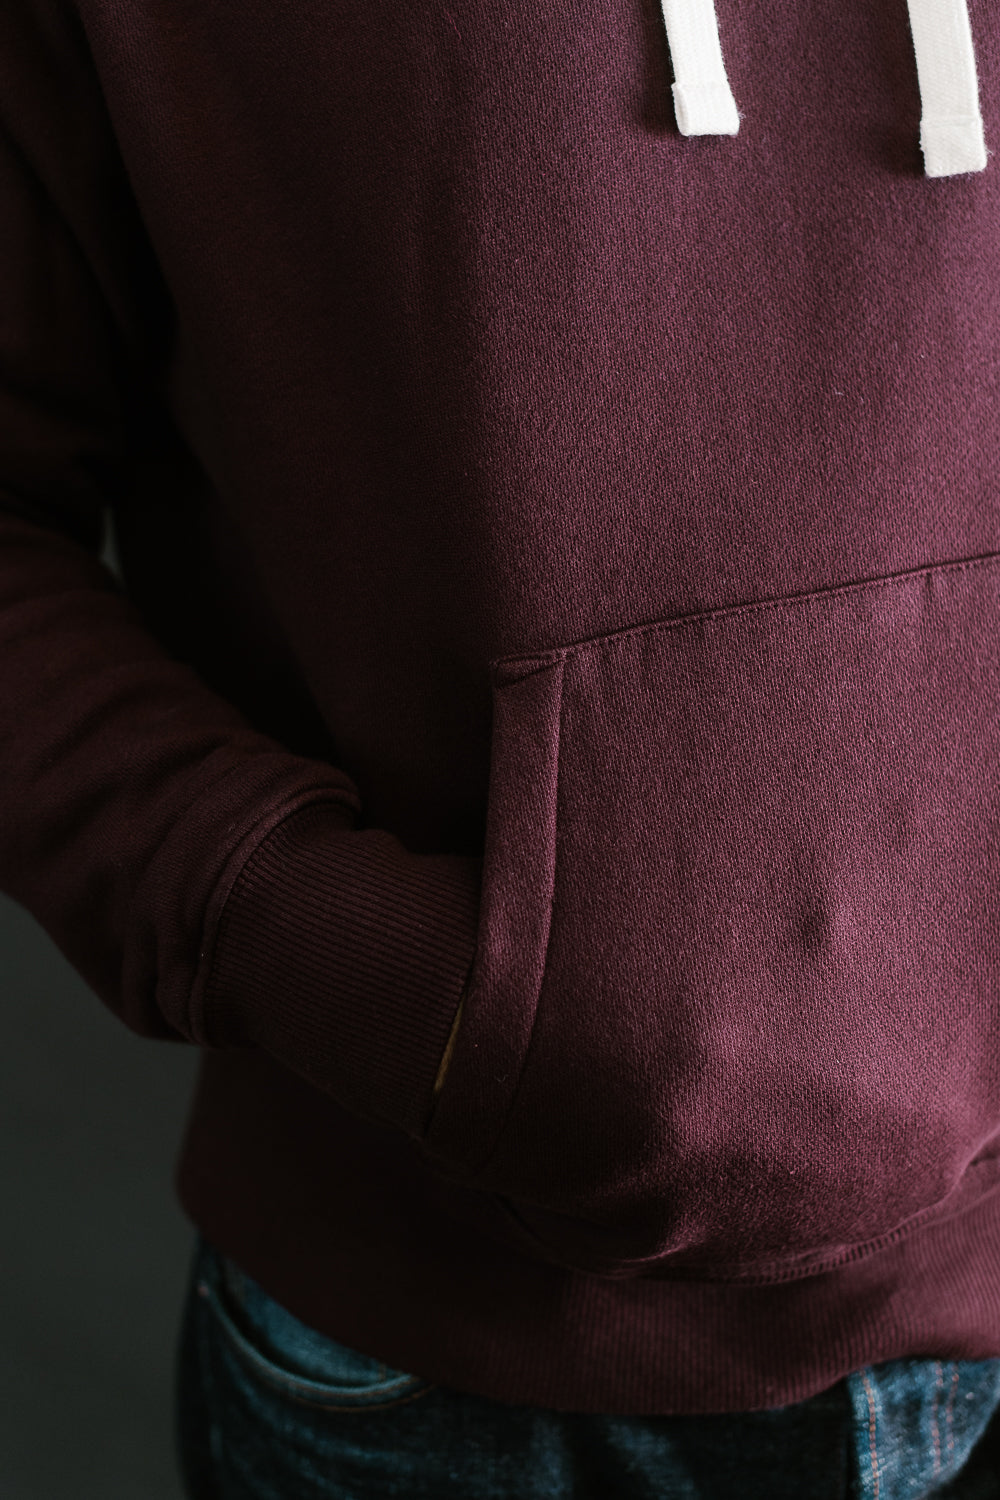 HD31.506 - 13oz Athletic Hoodie Relaxed Fit - Burgundy